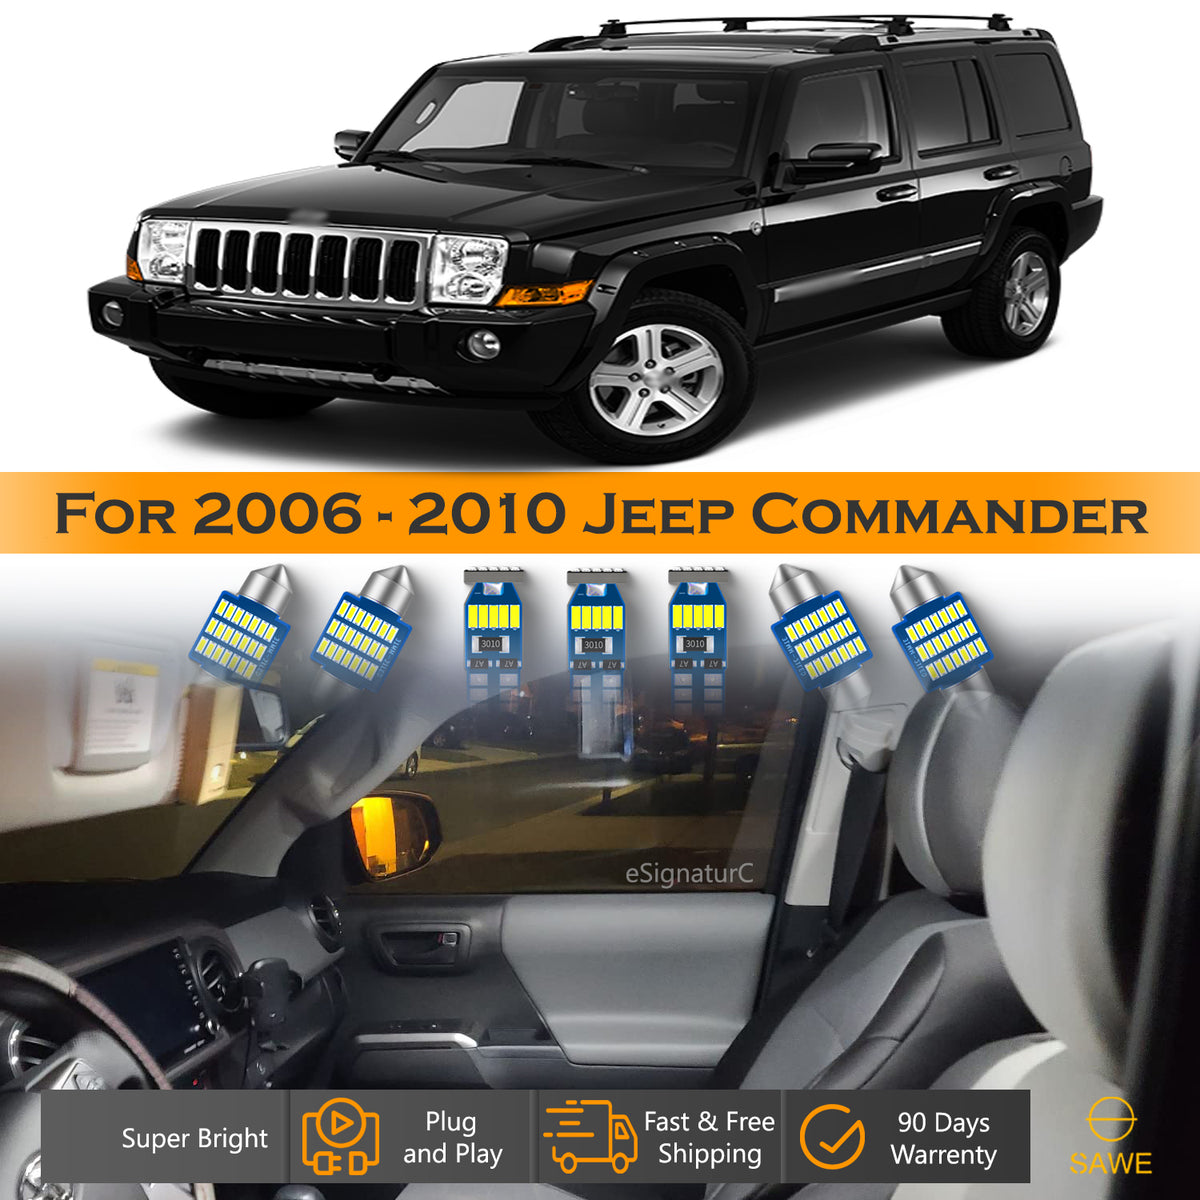 For Jeep Commander Interior LED Lights - Dome & Map Light Bulbs Package Kit for 2006 - 2010 - White